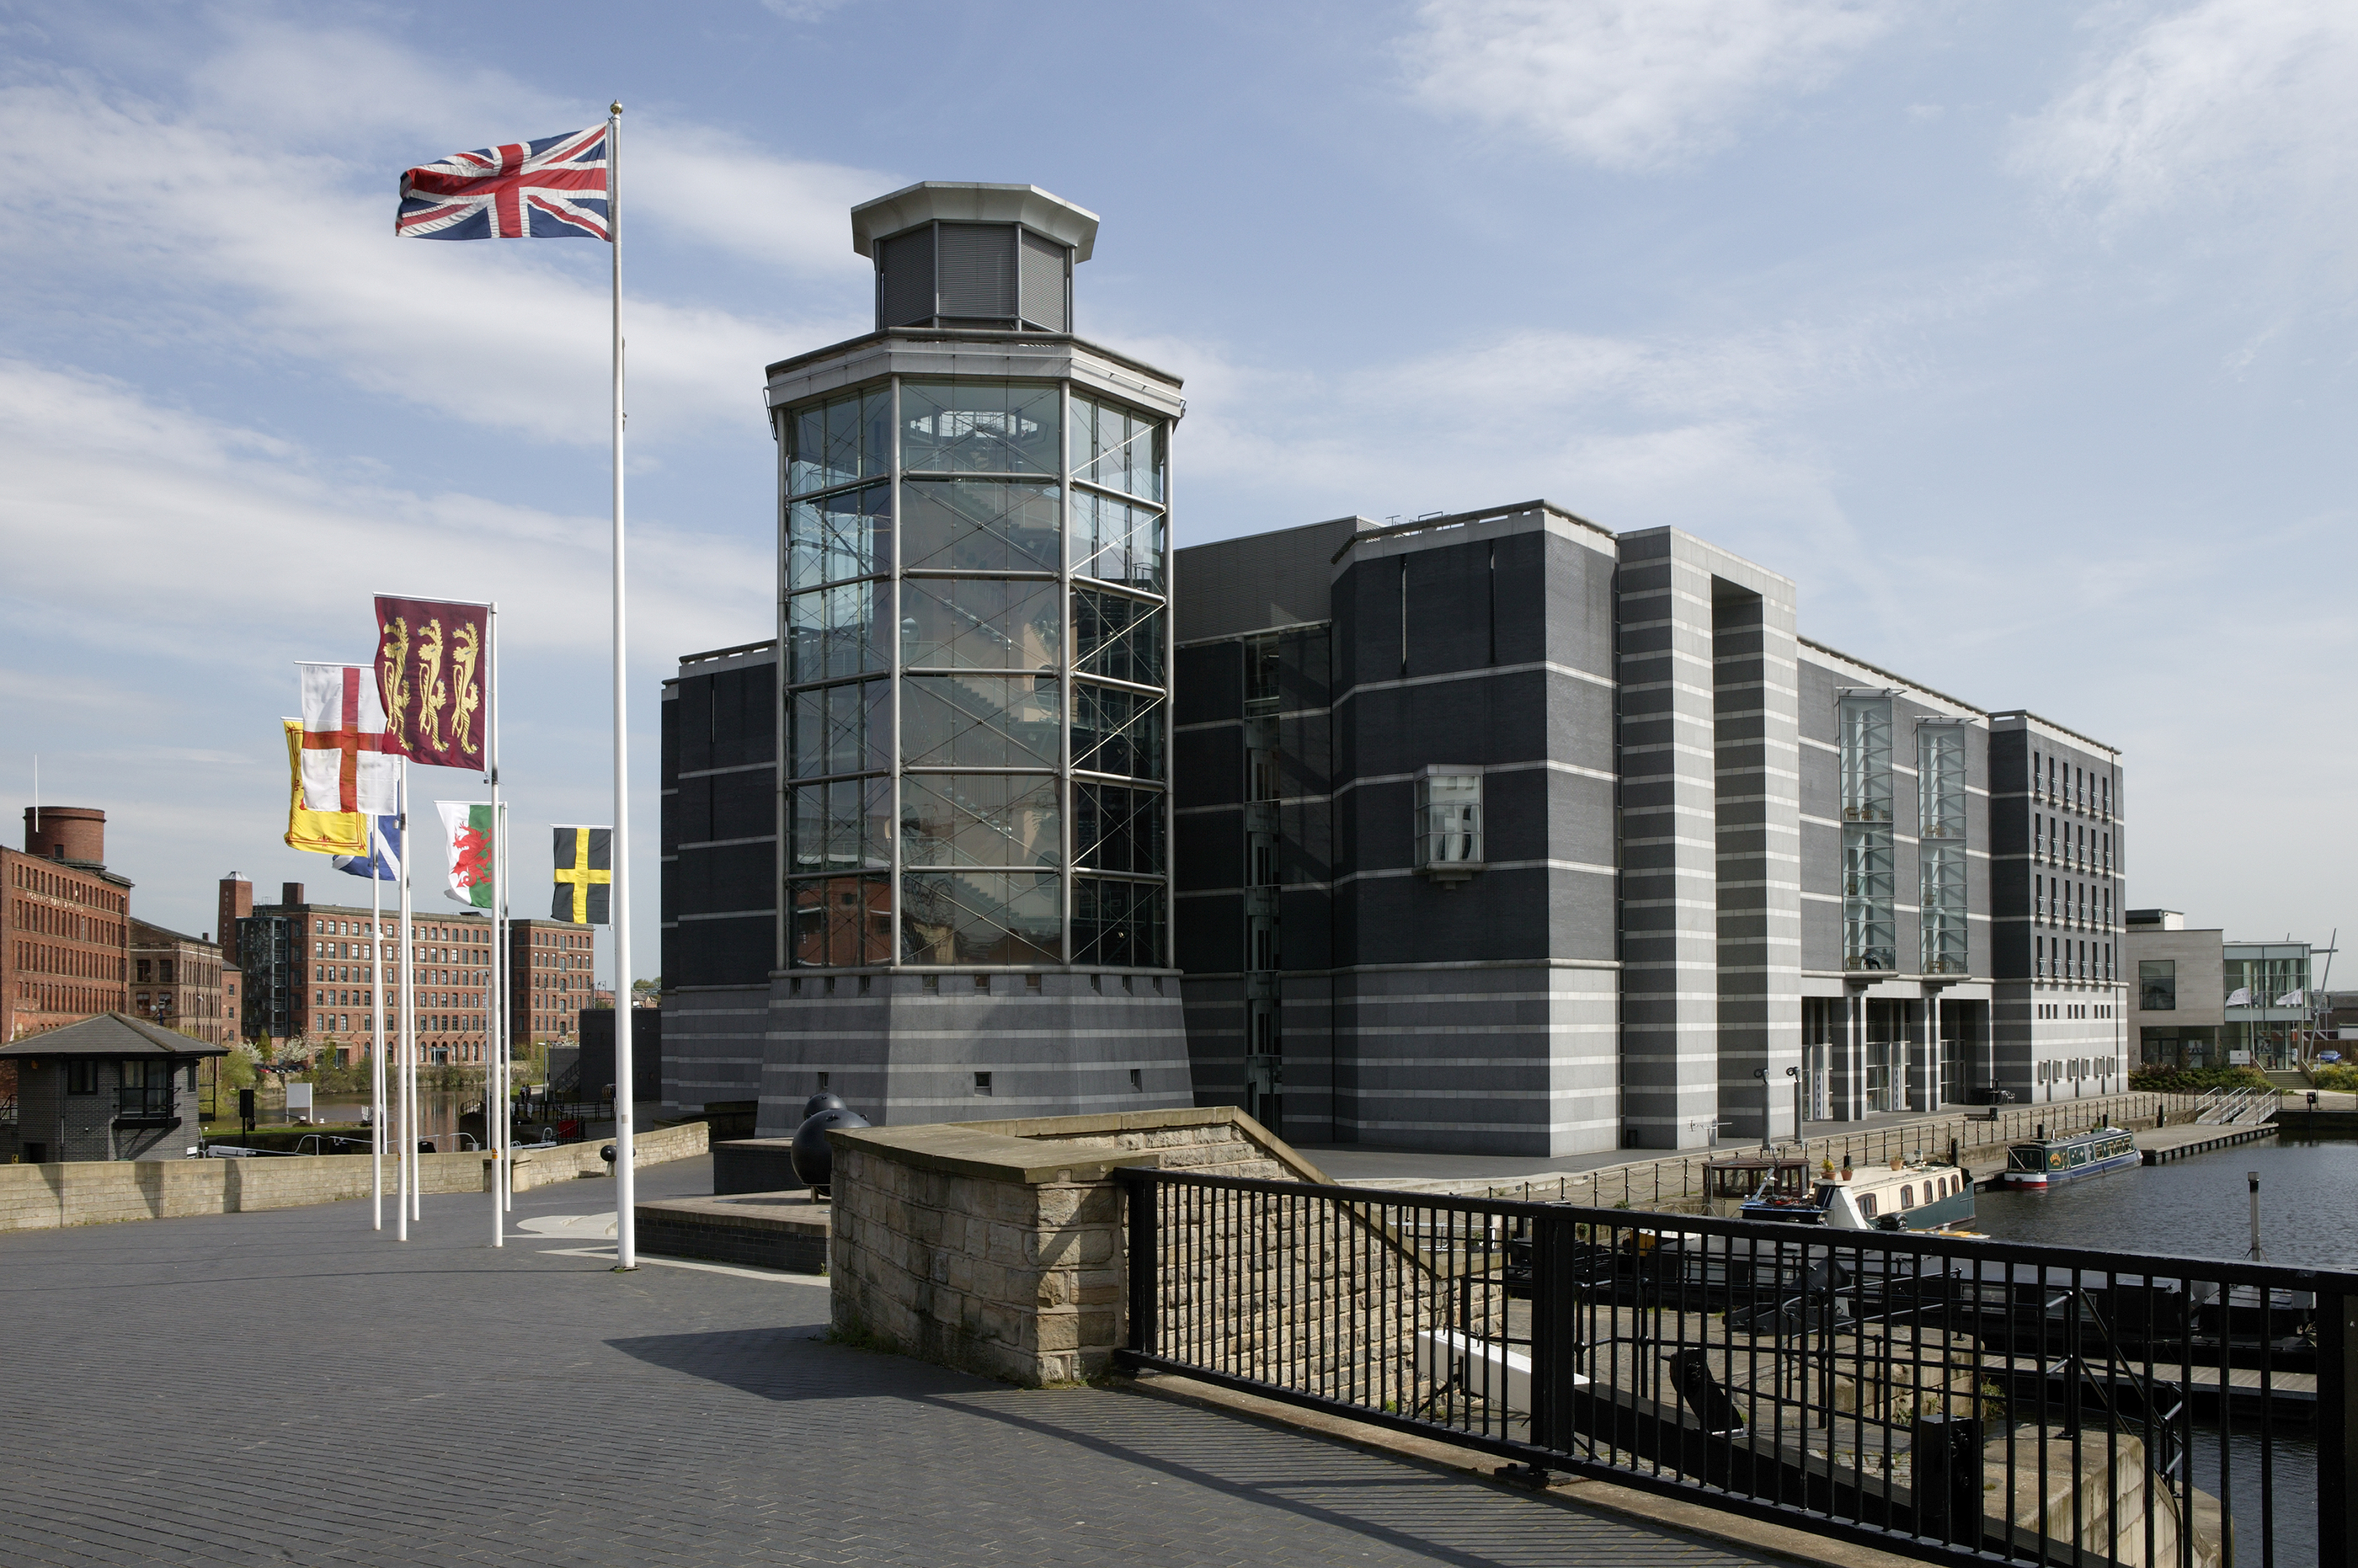 The Royal Armouries Museum